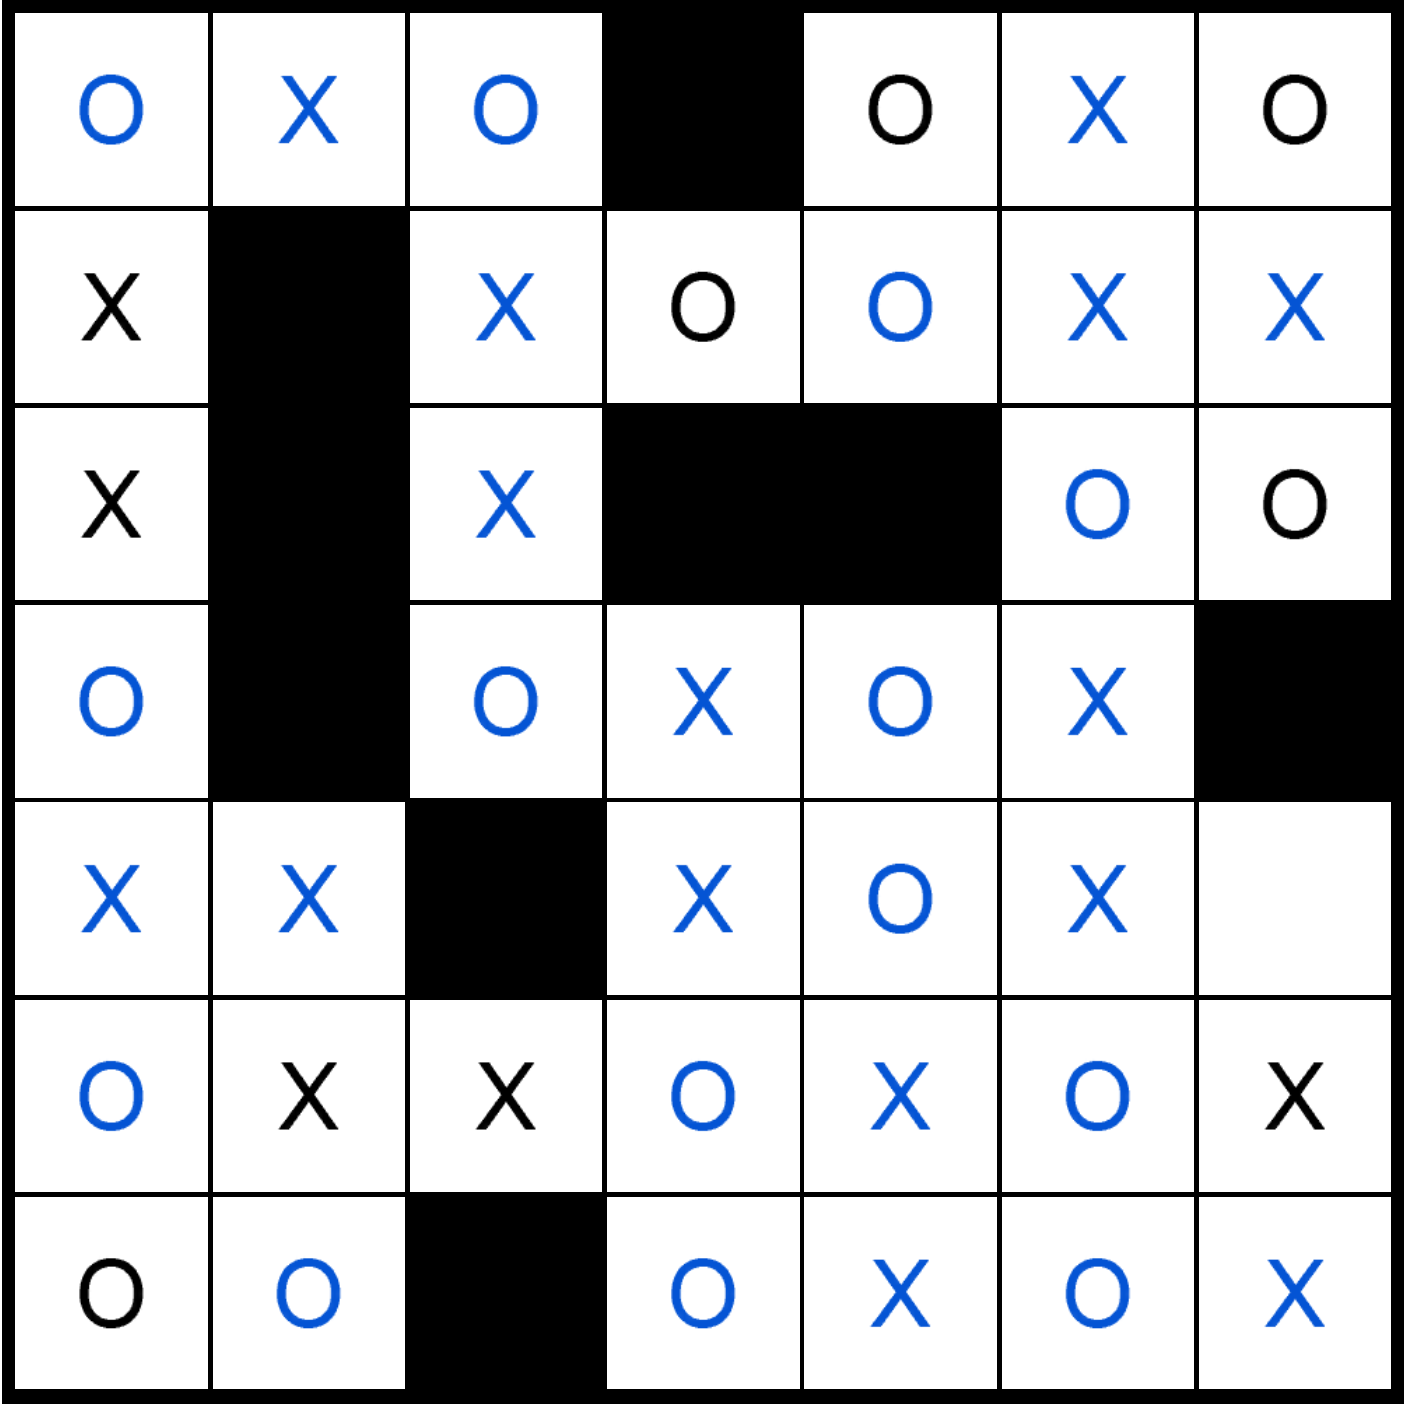 Puzzle Page Os and Xs June 13 2019 Answers PuzzlePageAnswers net